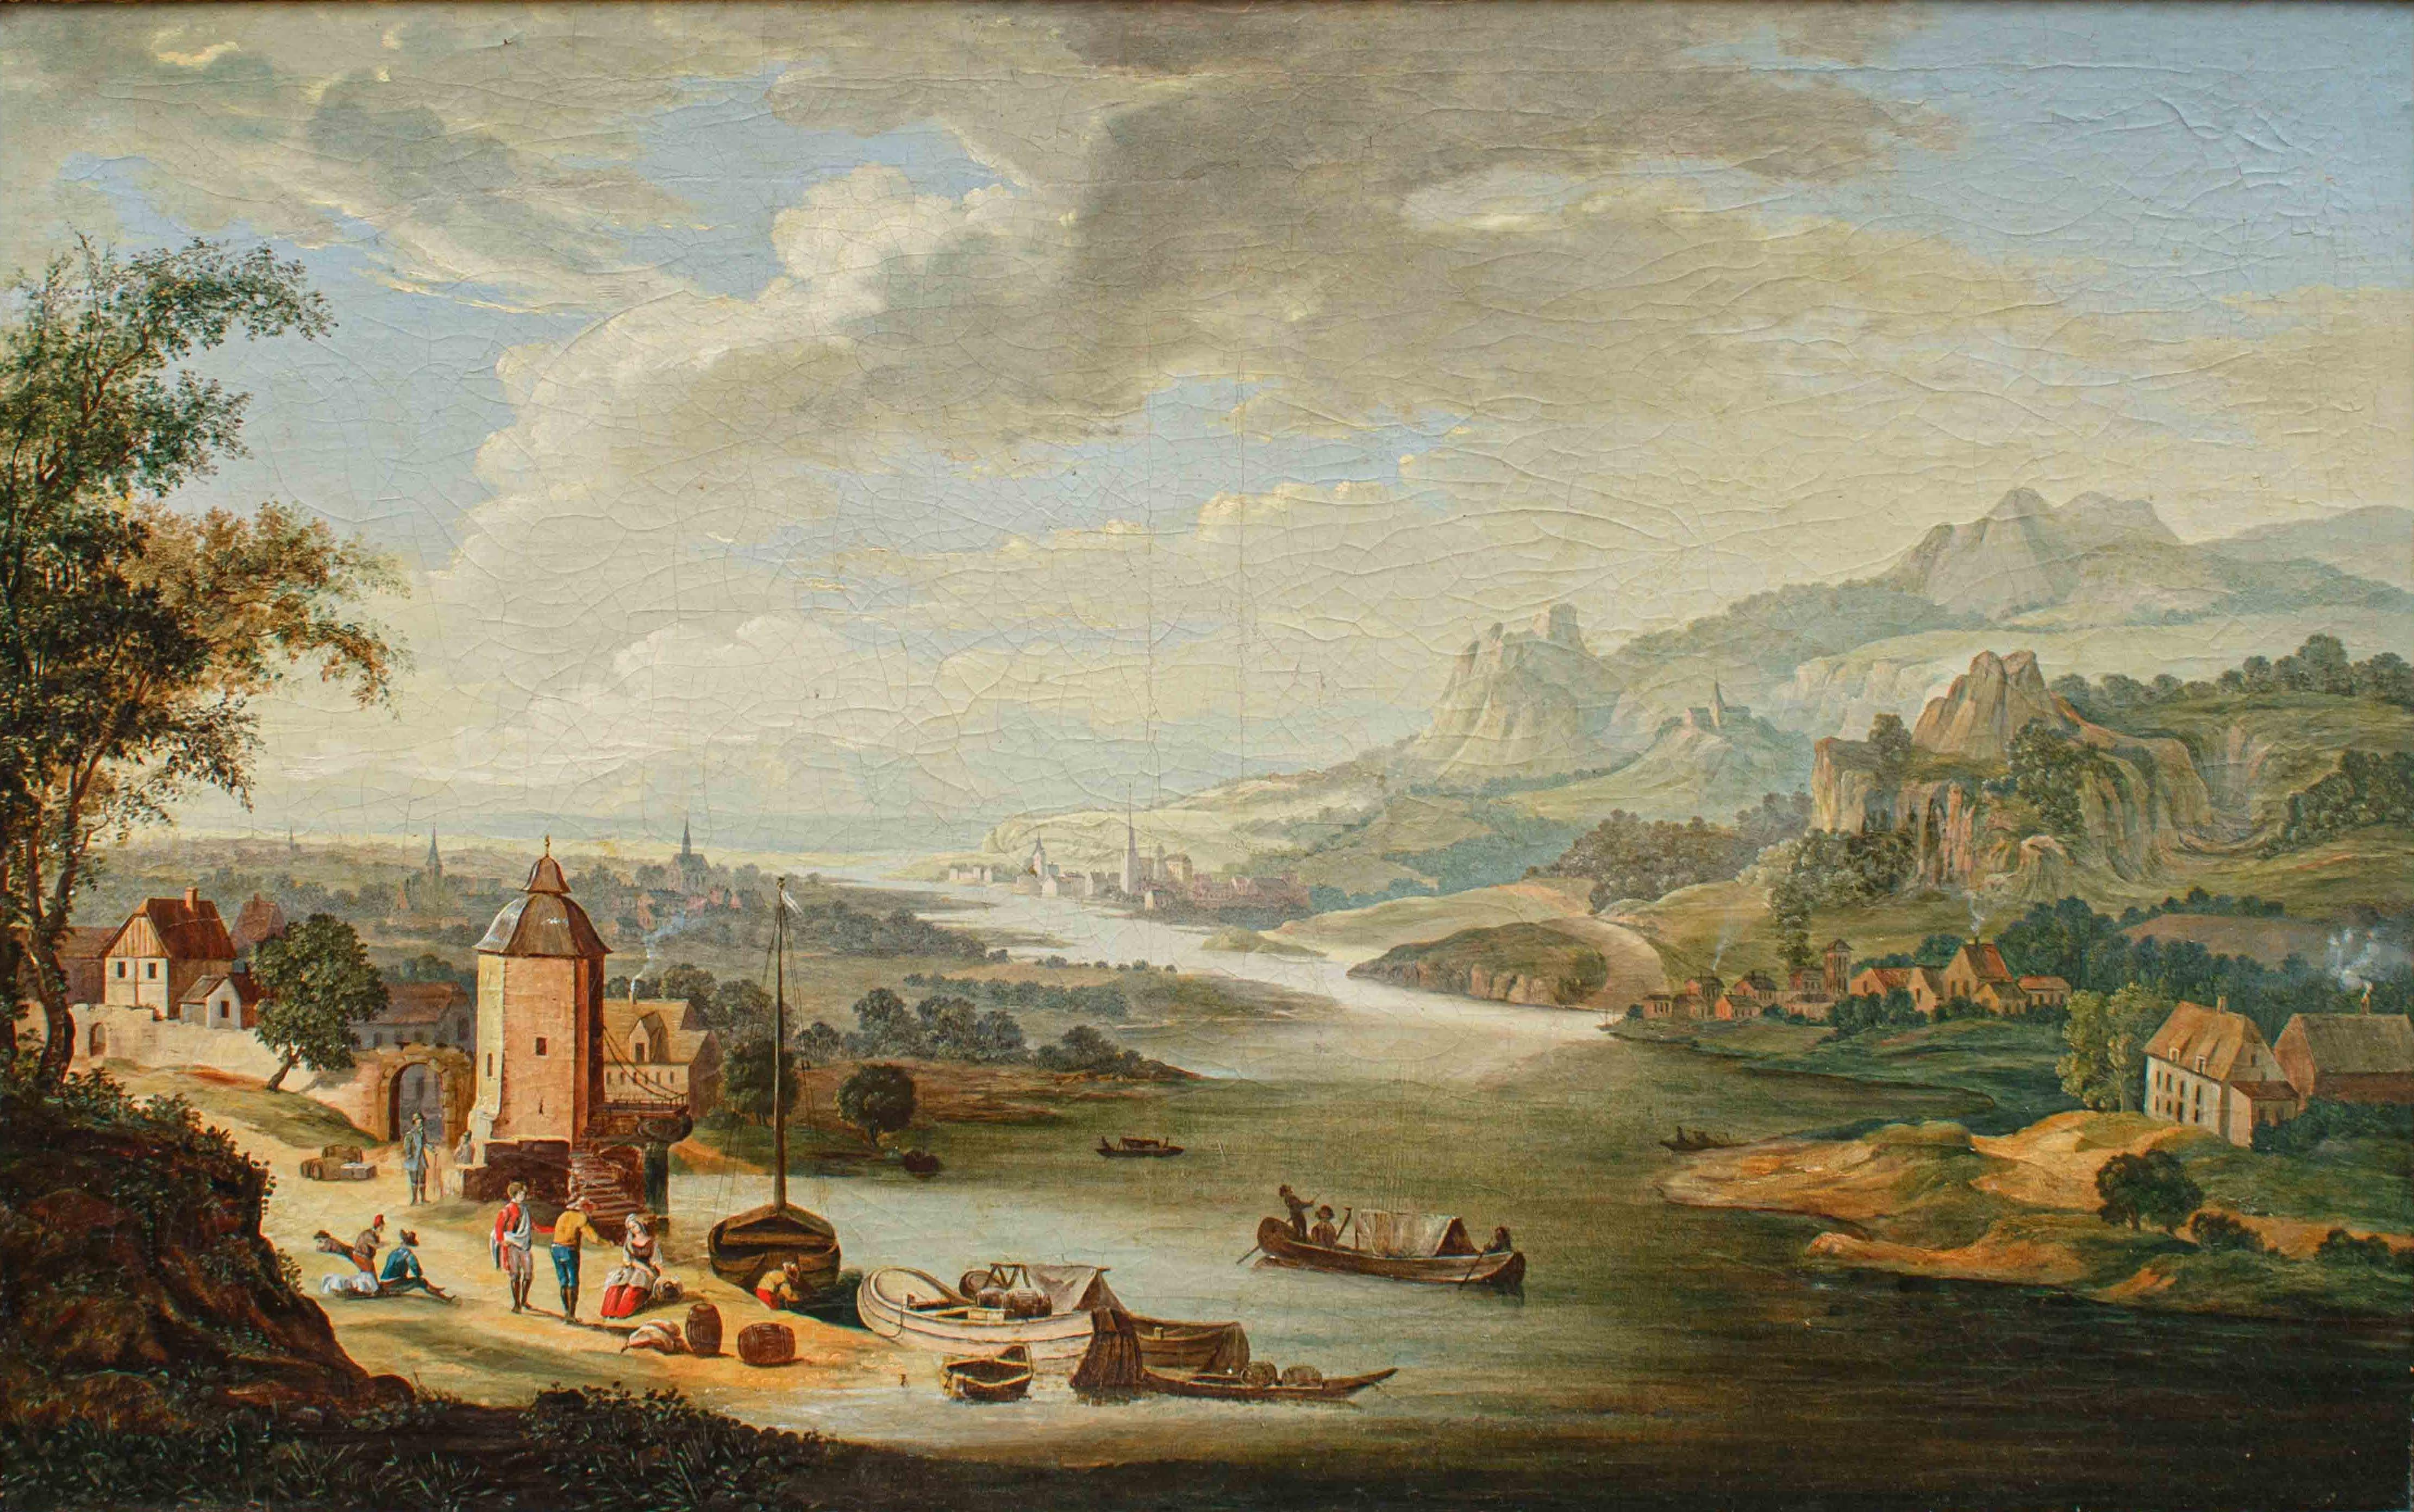 Late 18th - early 19th century
River Landscape
Oil on canvas, 64 x 96 cm - with frame 77 x 10 cm

The canvas in question is an example of Vedutist painting at the turn of the 18th and 19th centuries, attentive as much to the real datum, the